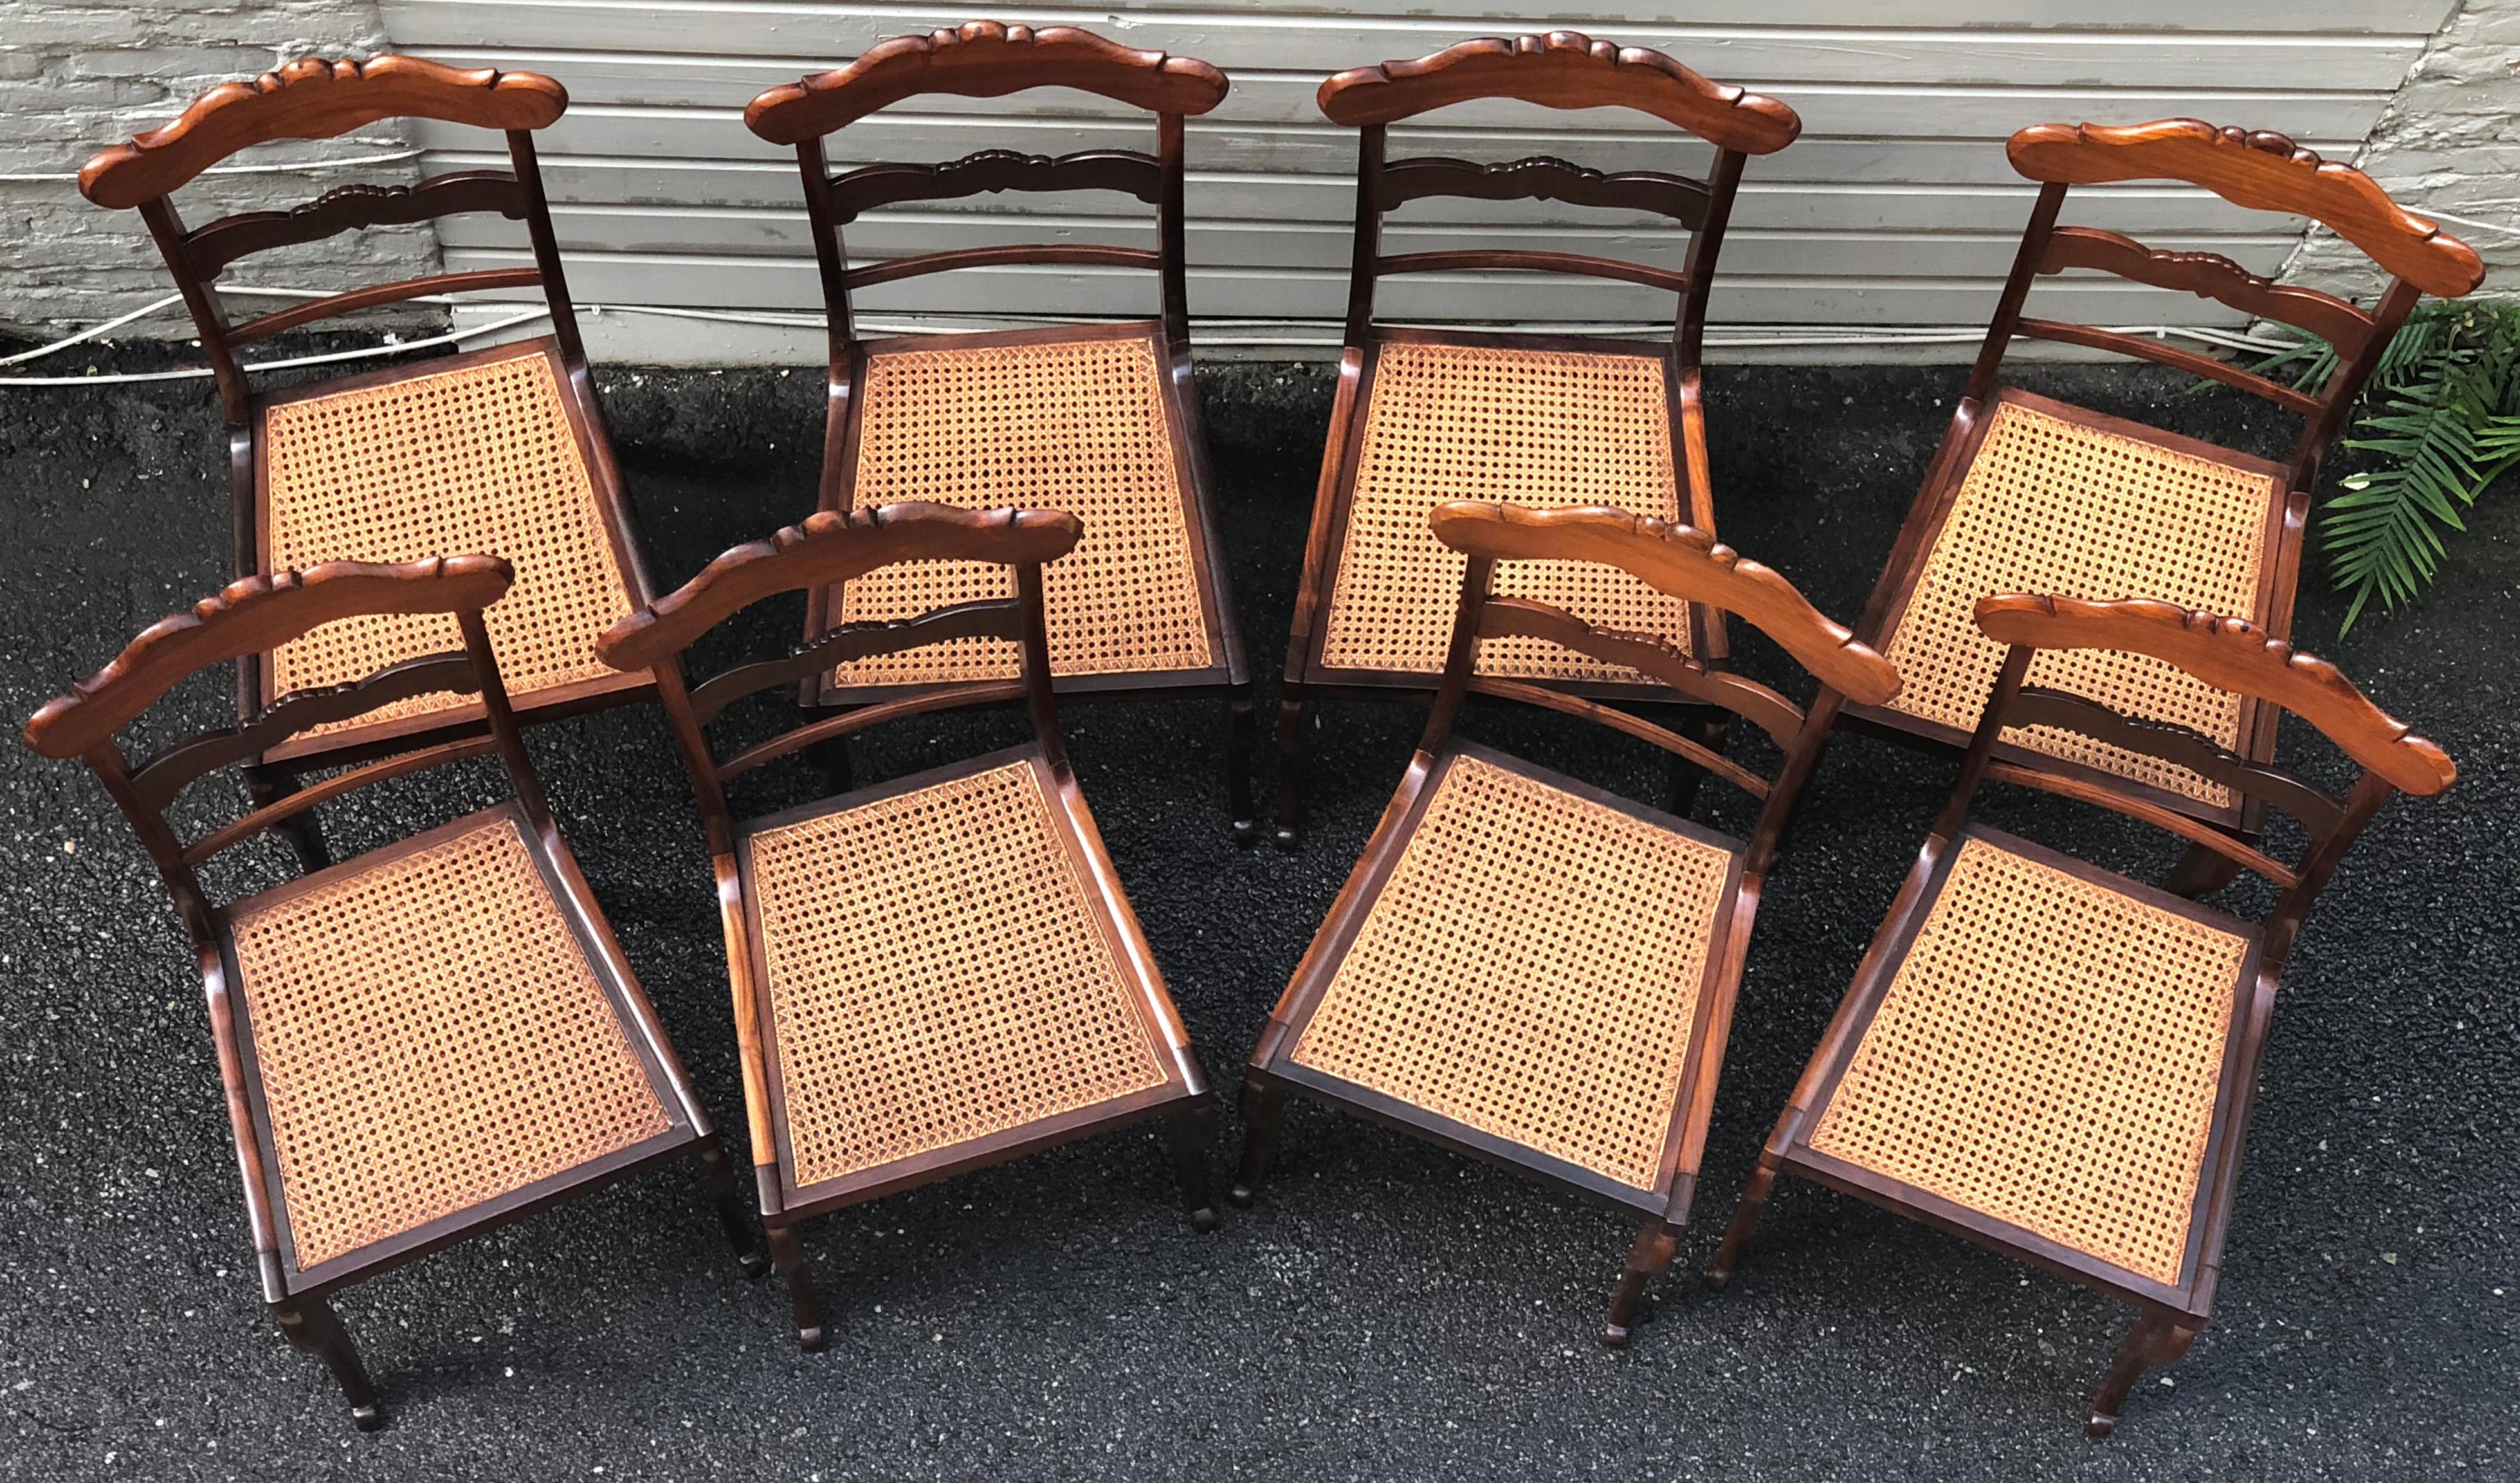 Wonderful set of eight rosewood Regency dining chairs with hand caned seats. These West Indies Regency chairs have a strong British Colonial influence, they are solid rosewood with high backs that are curved for back support and the caning for air